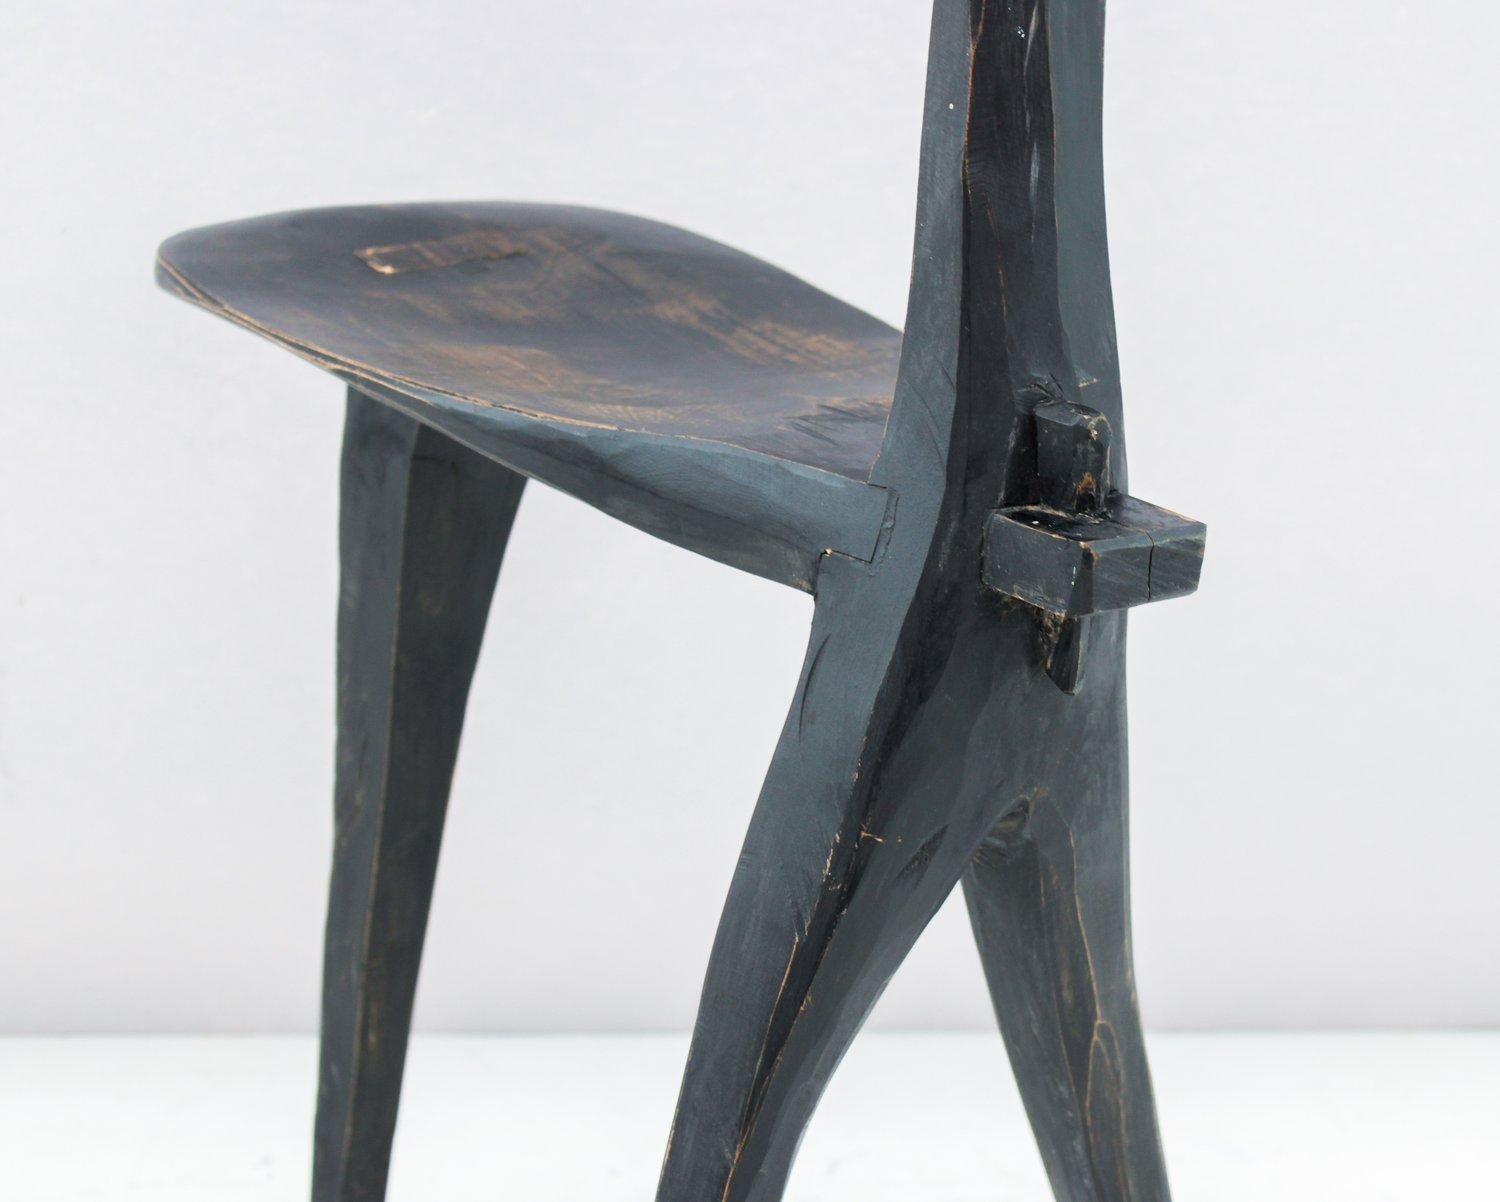  Frank Morzuch’s work, as can be seen by this stool , explores striking a balance between old and new by taking inspiration from both natural and conceptual sources. 

While this sculptural stool is sturdy and well made, we encourage it be used as a